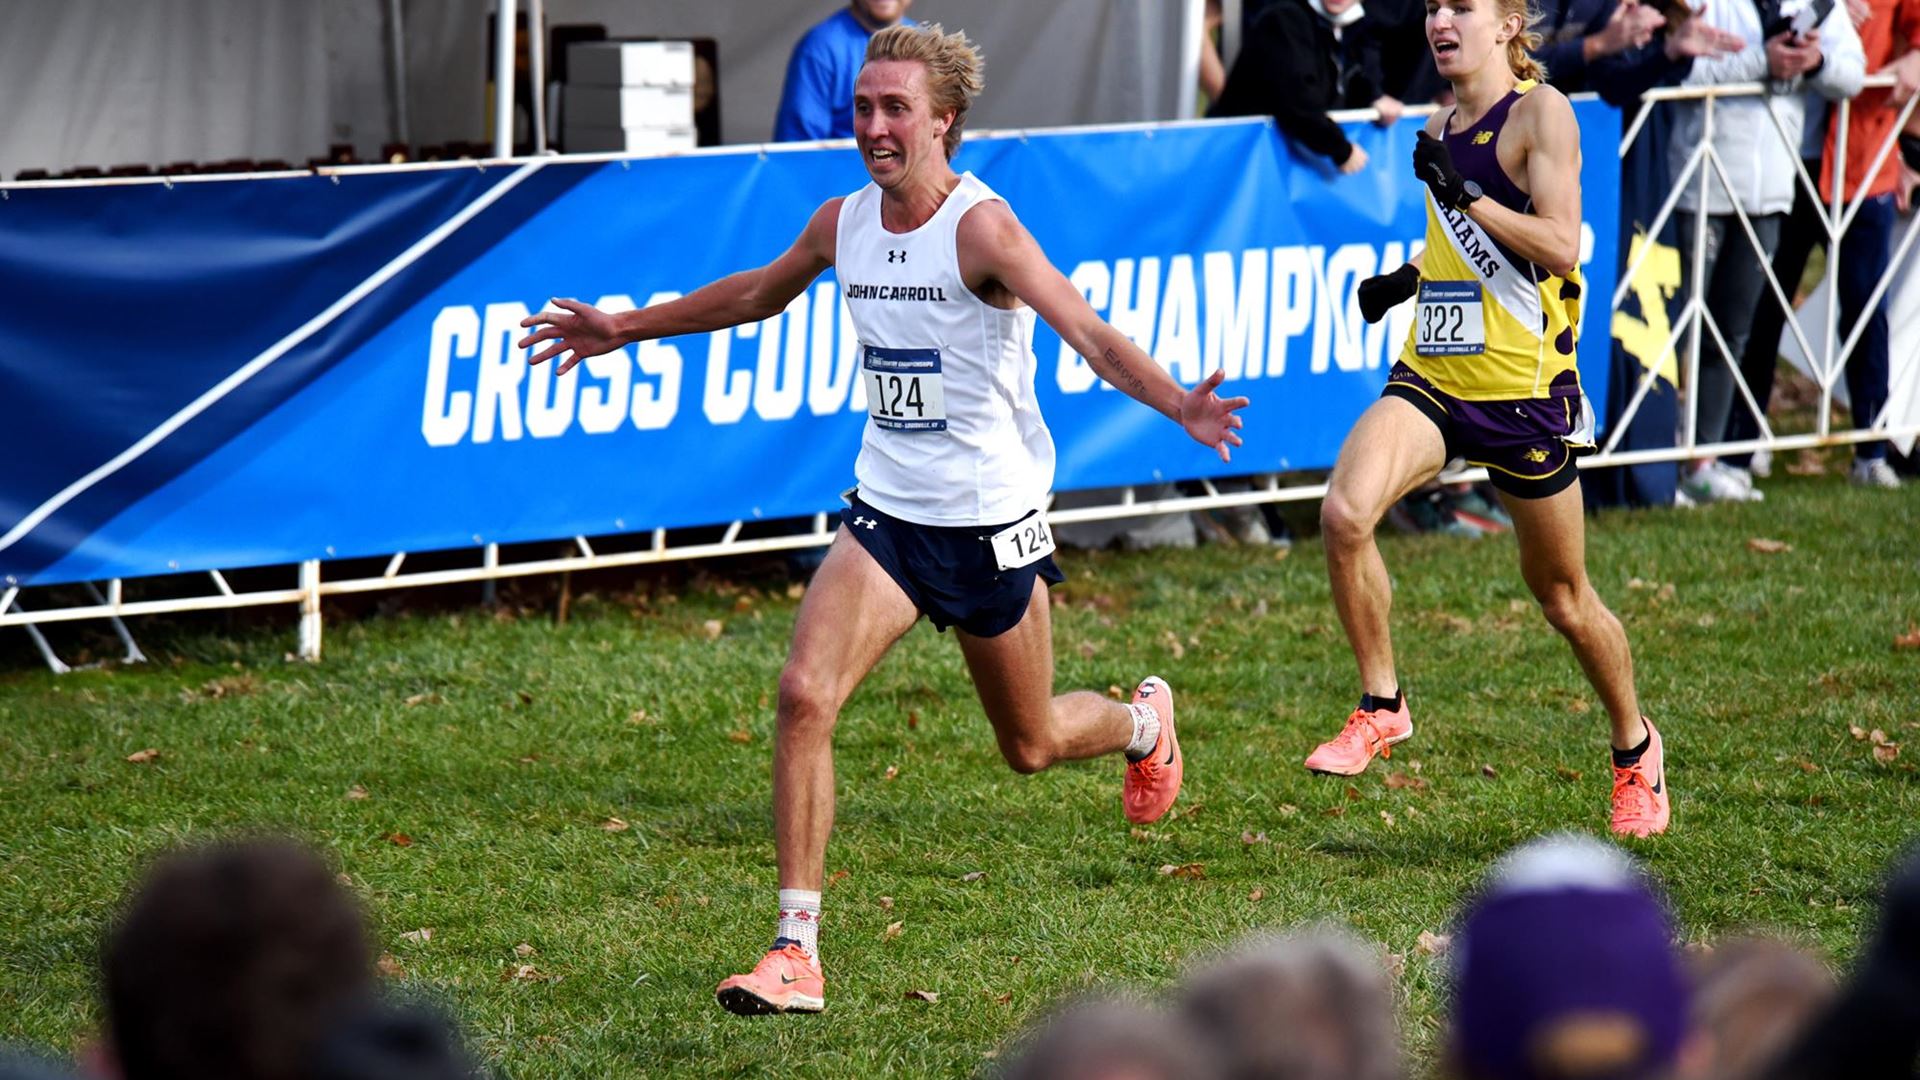 John Carroll Places Fourth at NCAA National Championships-Alex Phillip Wins Individual Title